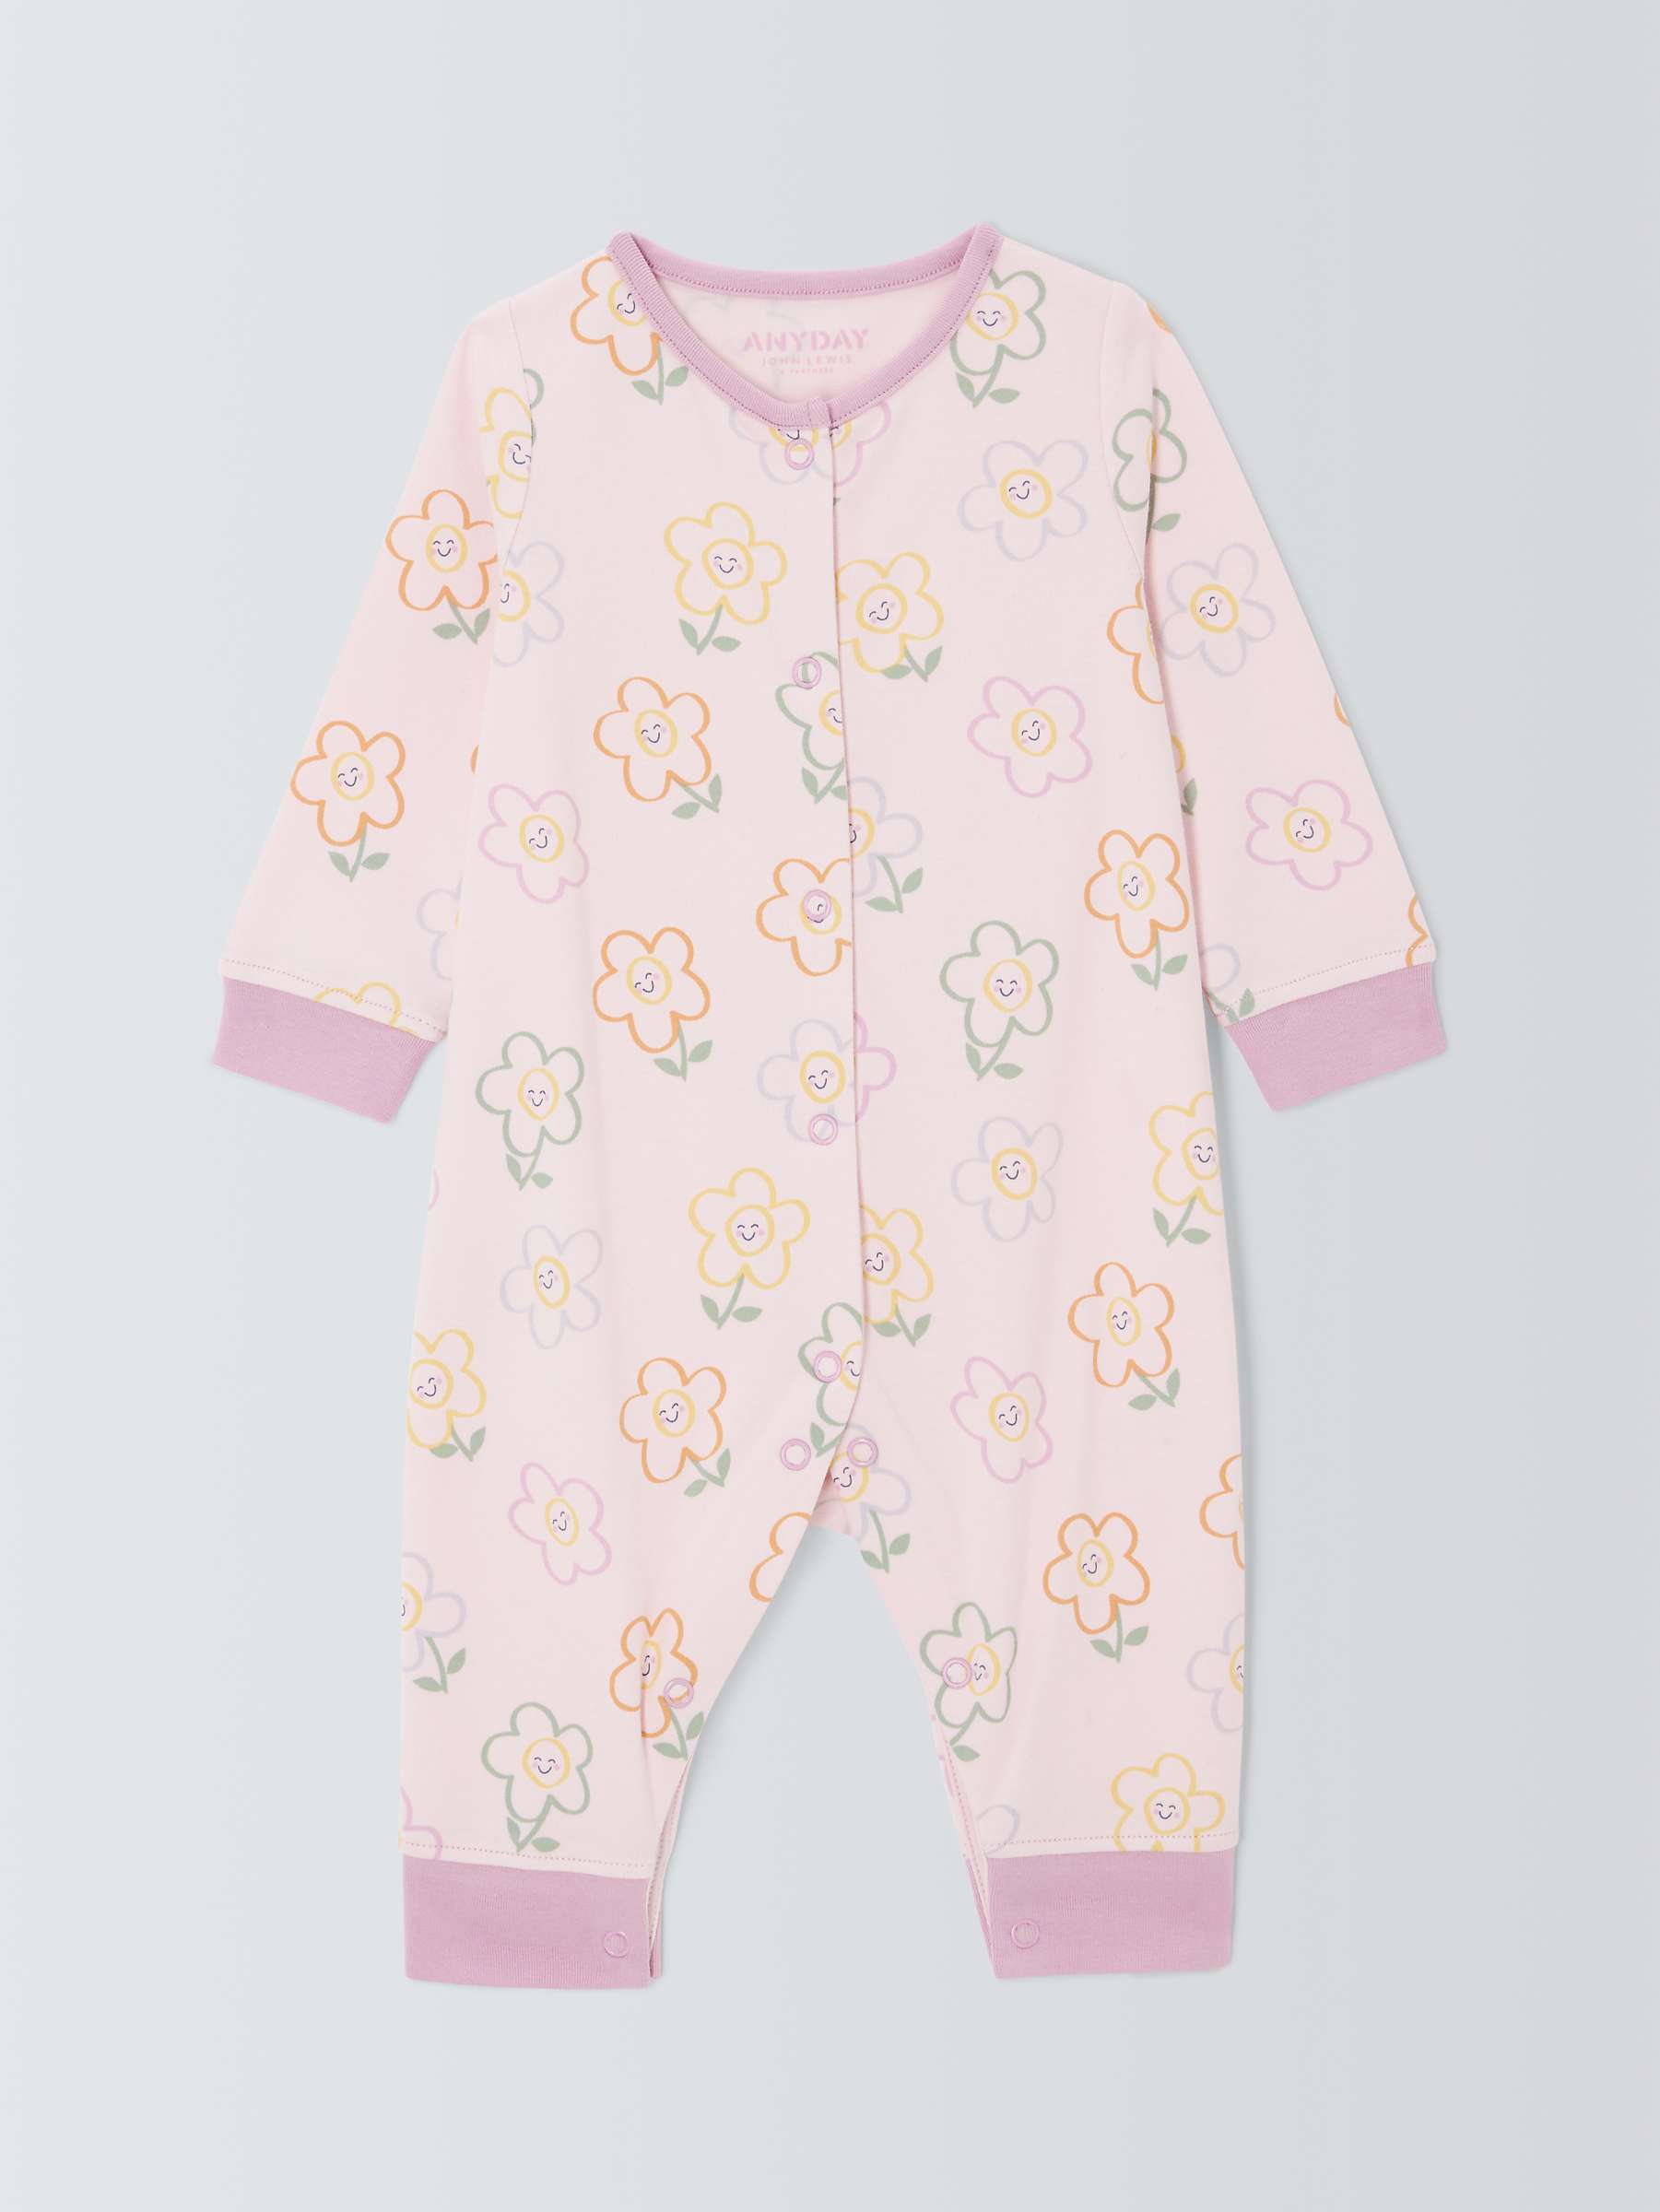 Buy John Lewis ANYDAY Baby Cotton Floral Sleepsuit, Pink Online at johnlewis.com